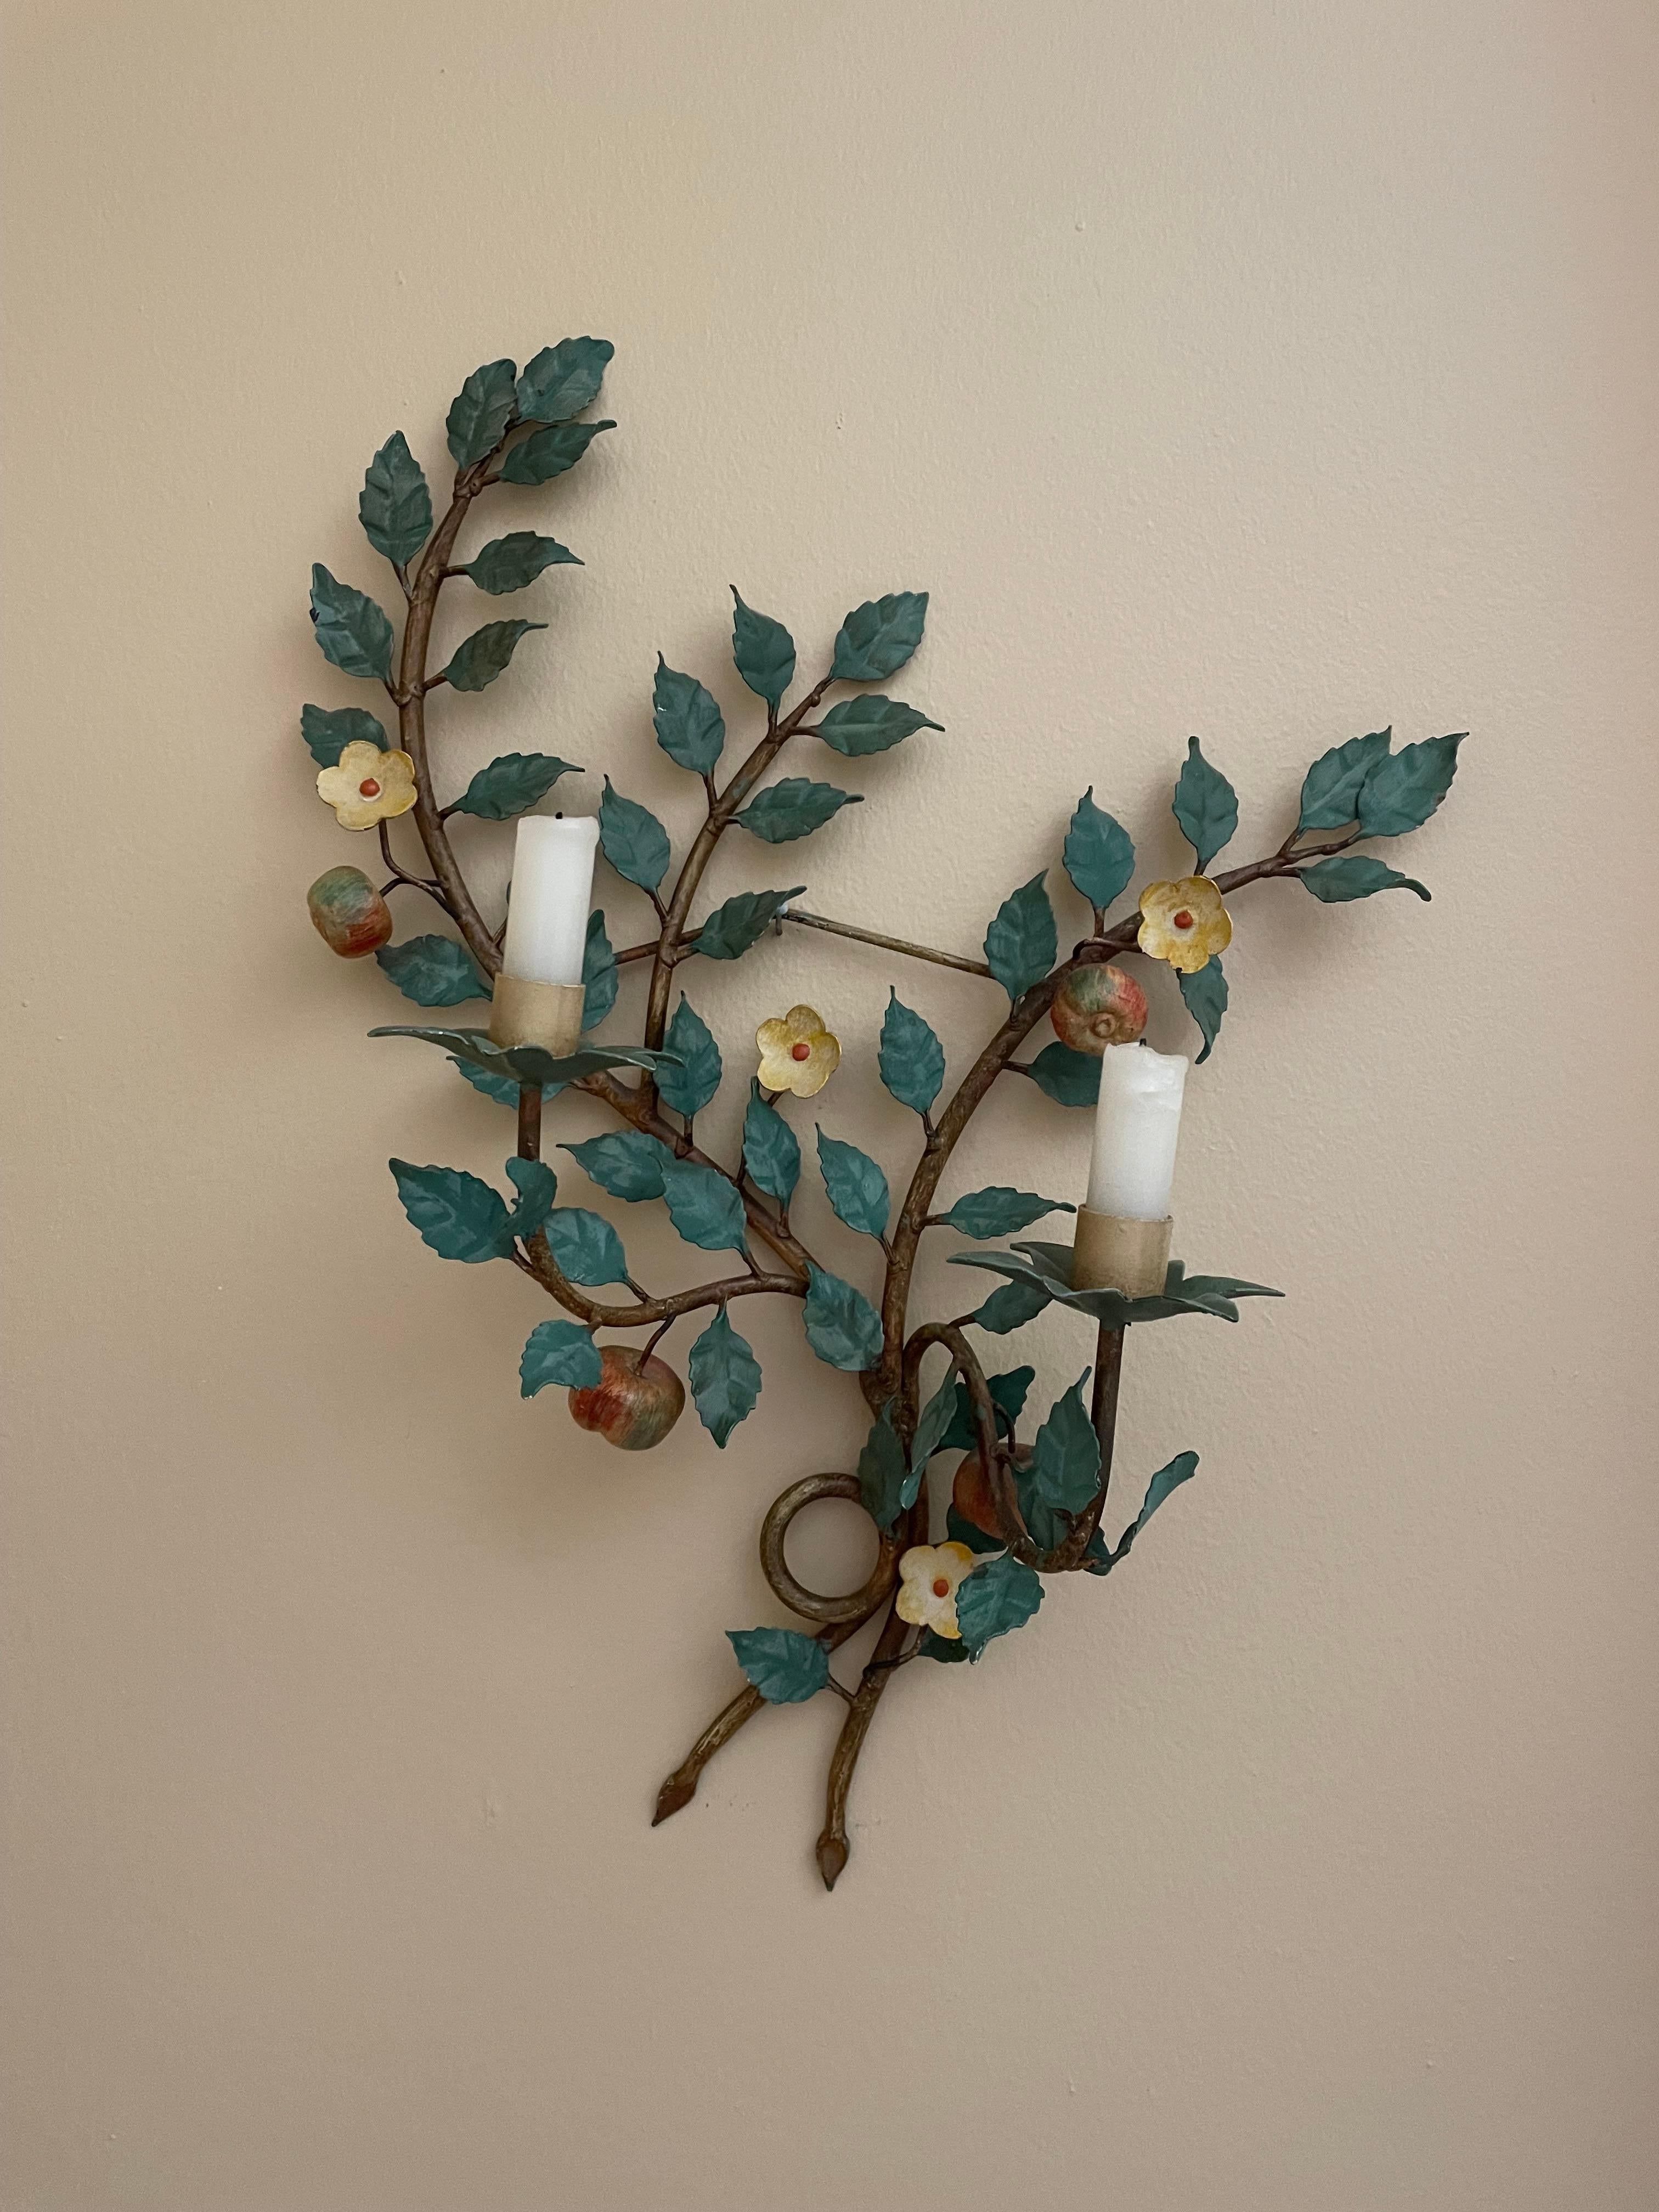 These Italian candle sconces from the 1950's are from the once iconic JL Hudson's department store in Detroit. From color palette to design, these hand-painted sconces are timeless and versatile accent pieces for most any room in your house.